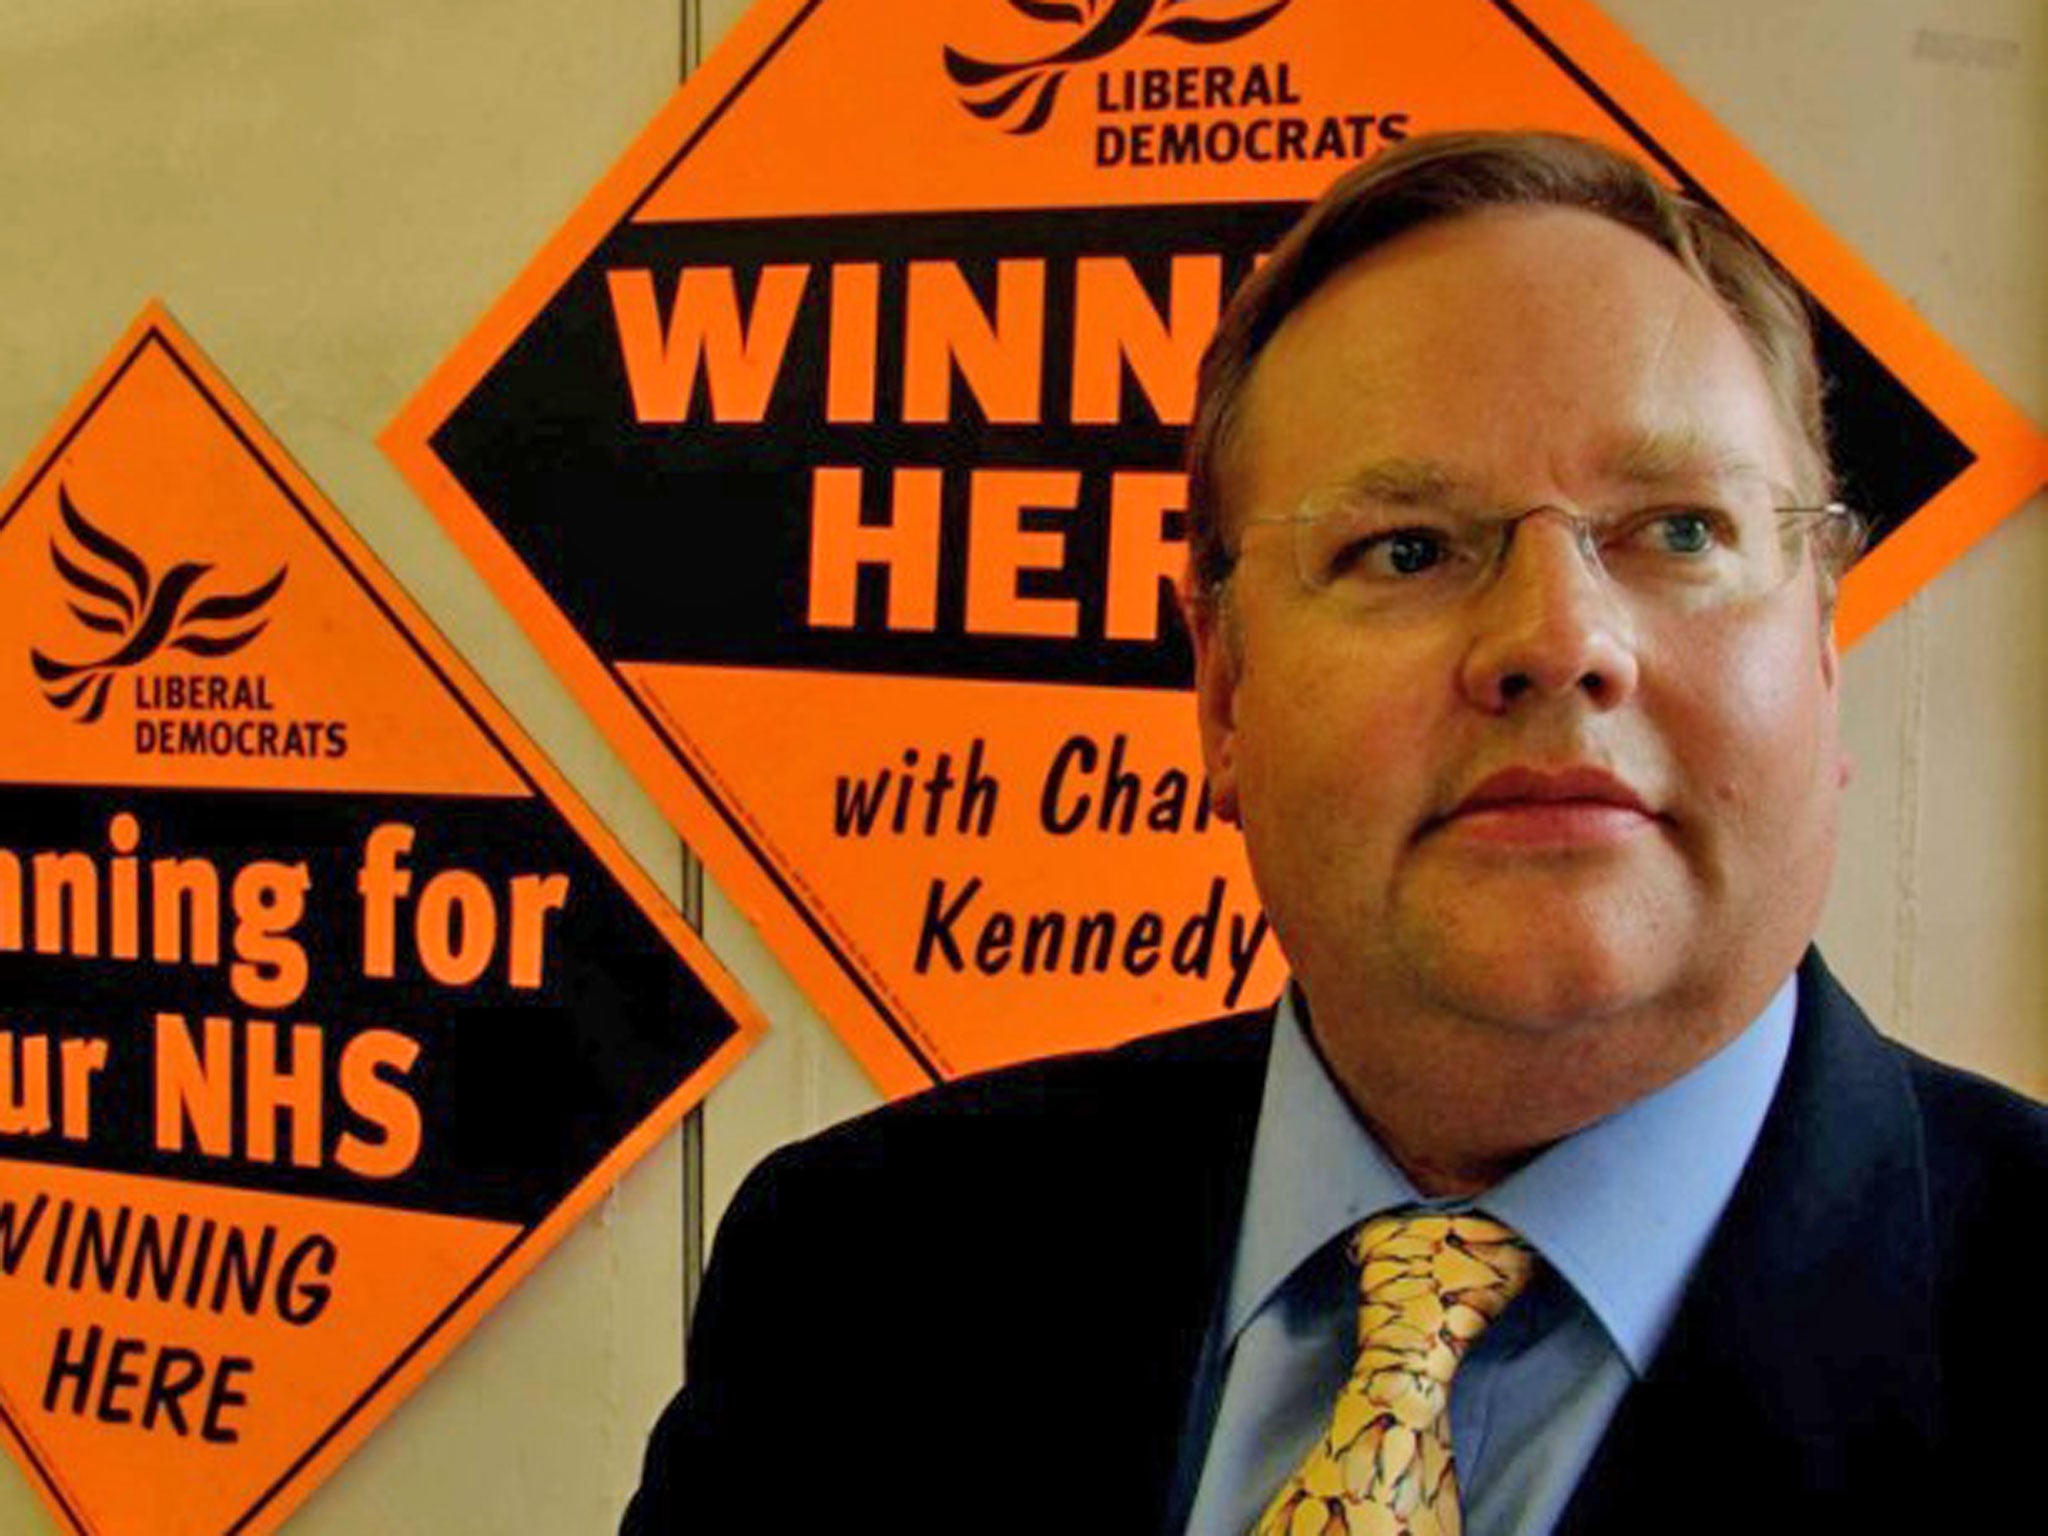 Lord Rennard denies allegations of sexual harassment